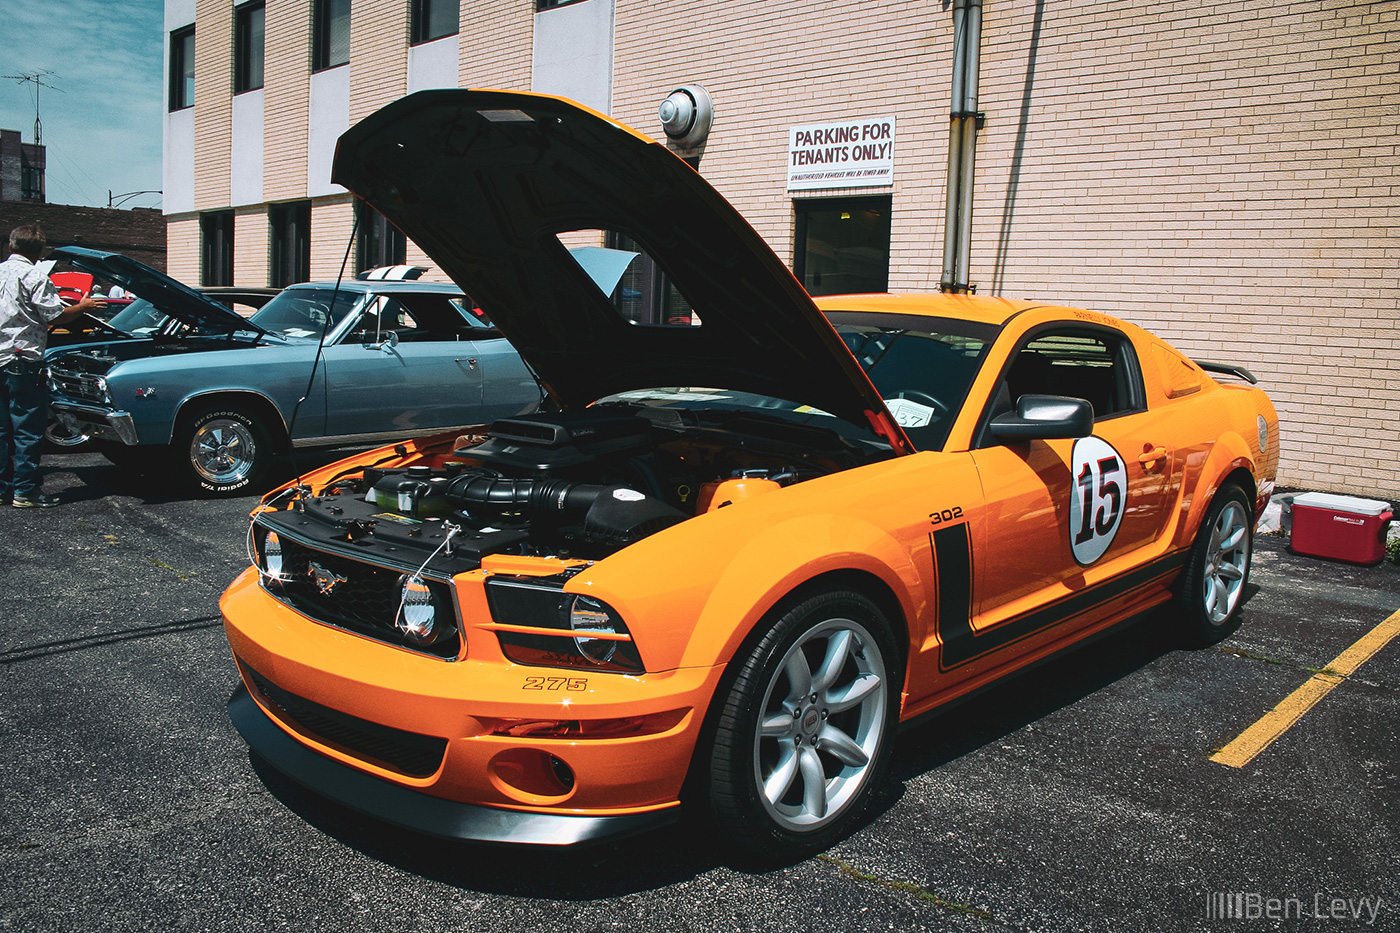 2007 Parnelli Jones Mustang at a Chicago Car Show